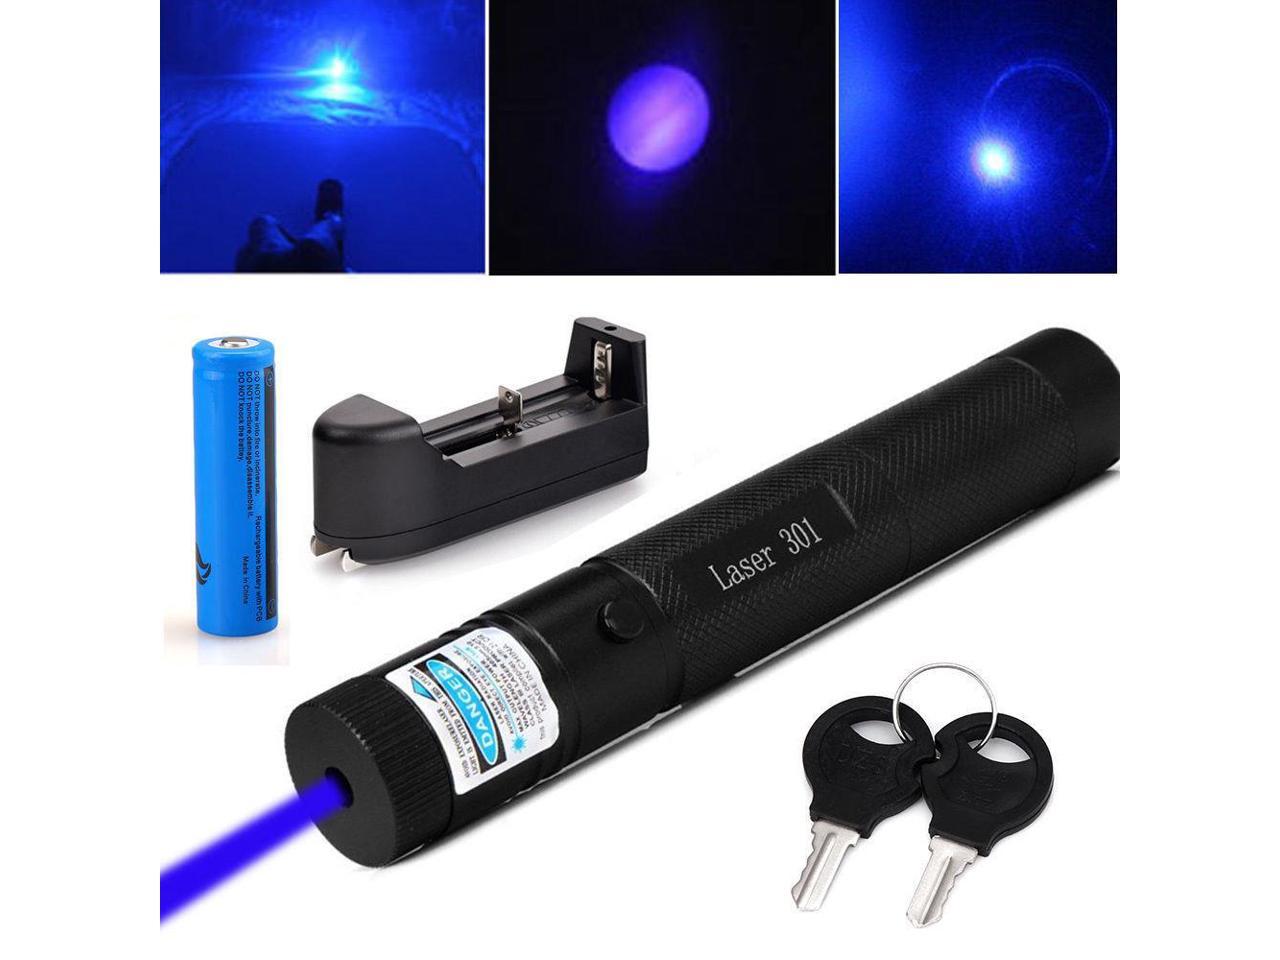 NEW 405nm Blue Visible Beam Light Laser Pointer W/ 4×16340 Batteries & 5 Caps! 